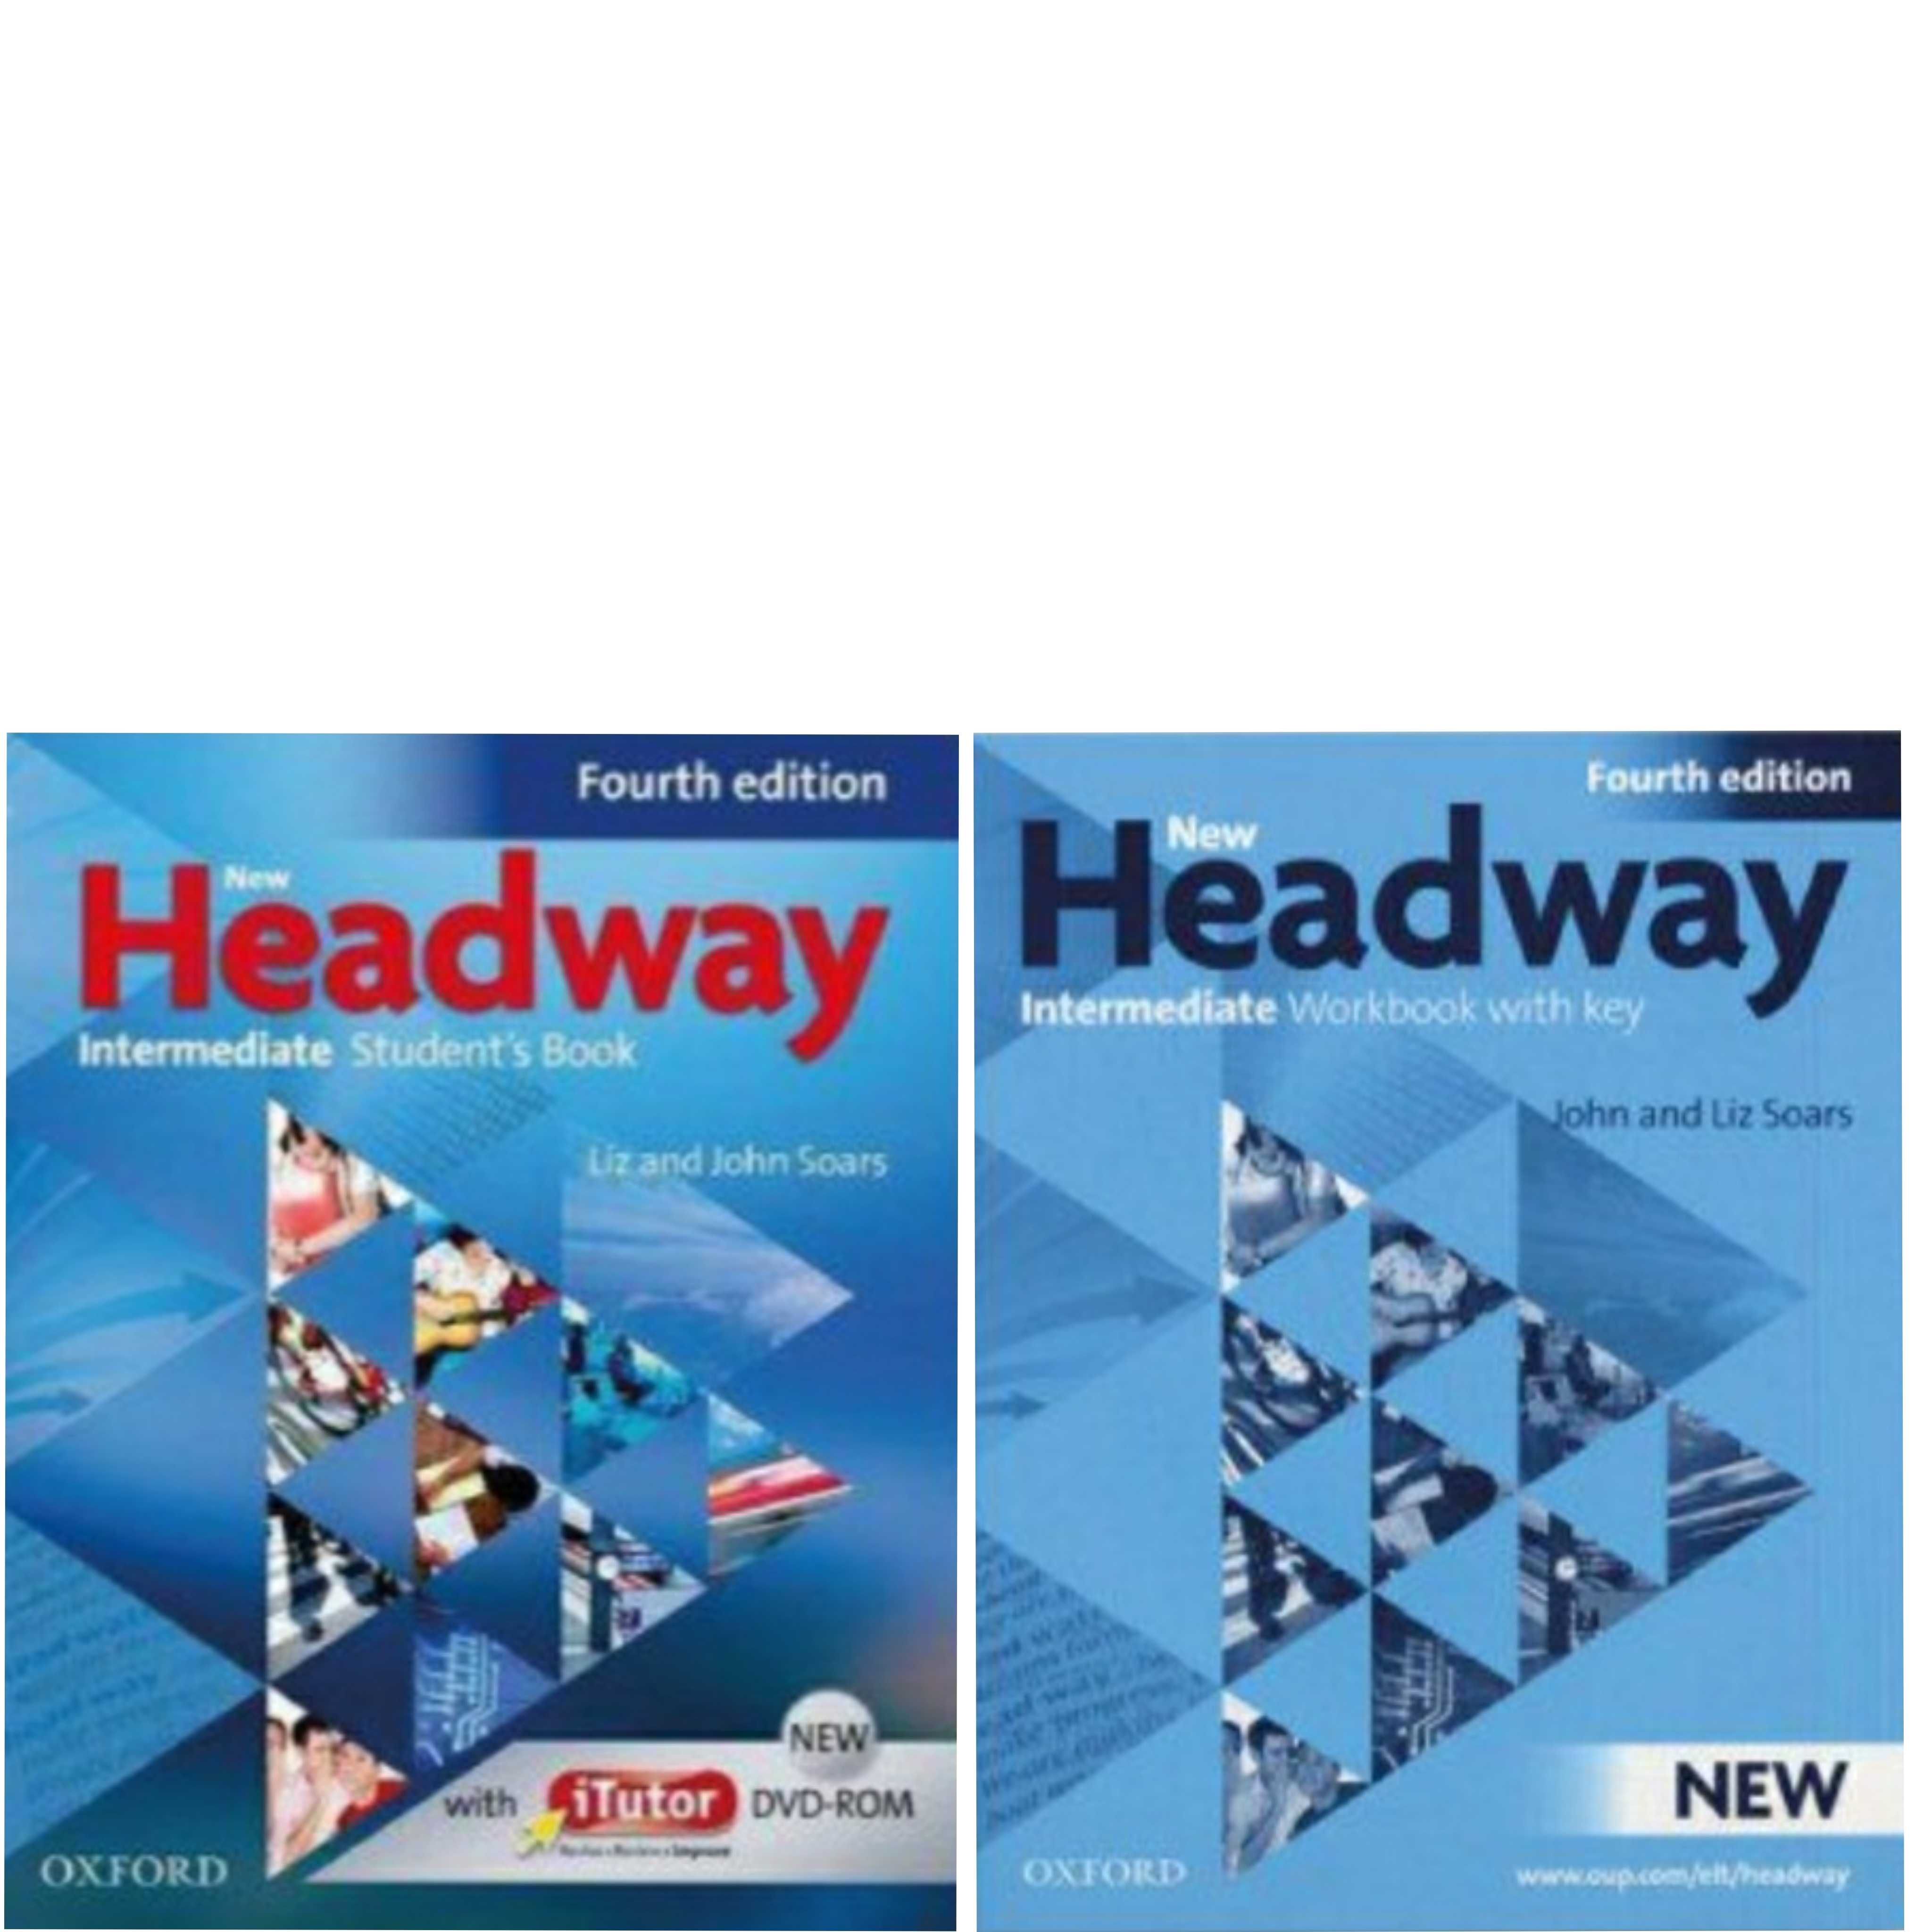 Доставка. New Headway fourth edition, student's book + workbook + диск